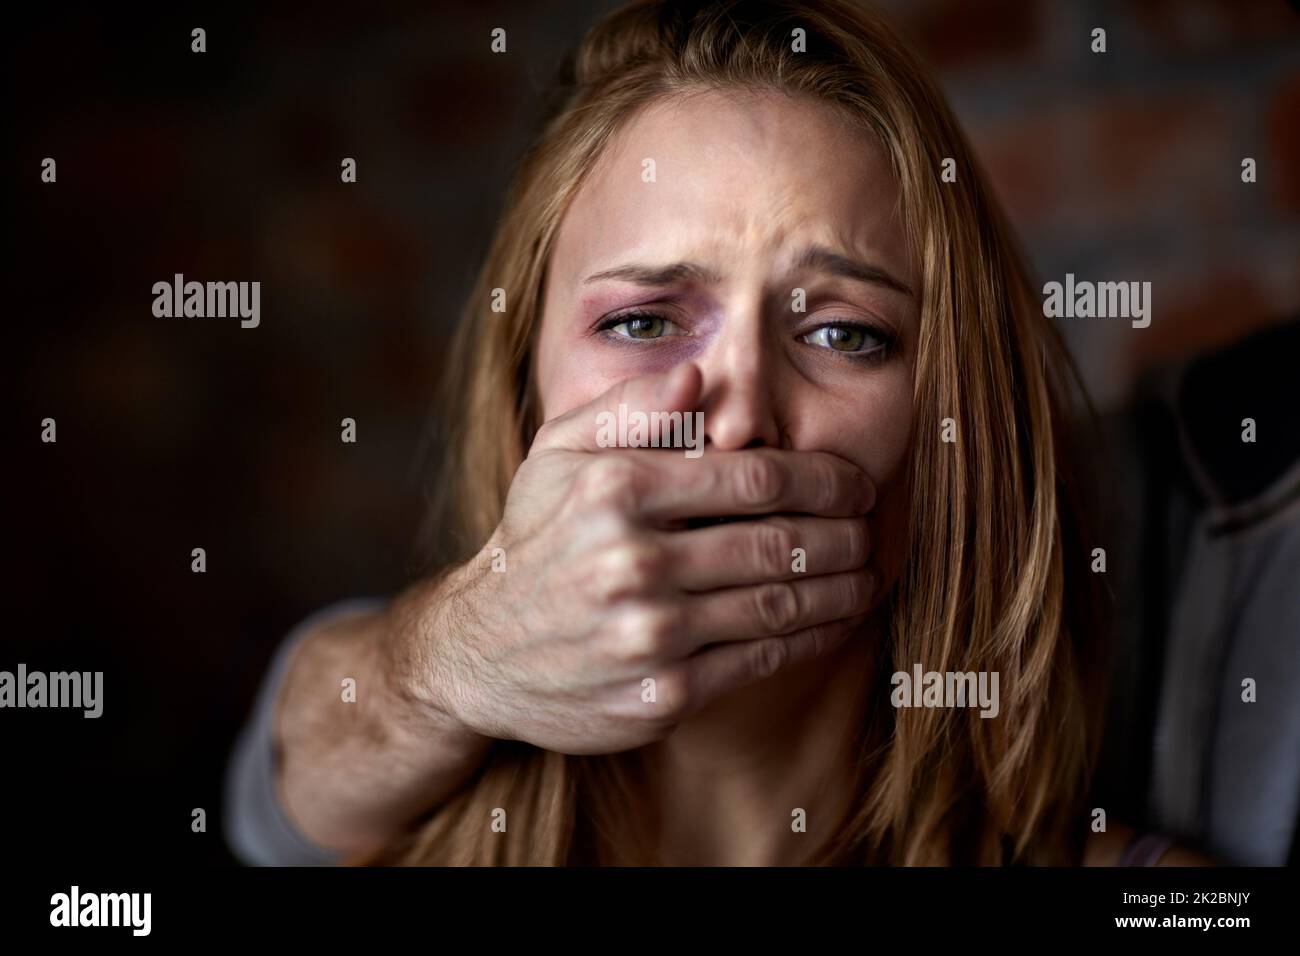 Silent destroyer. Abused young woman being silenced by her abuser. Stock Photo